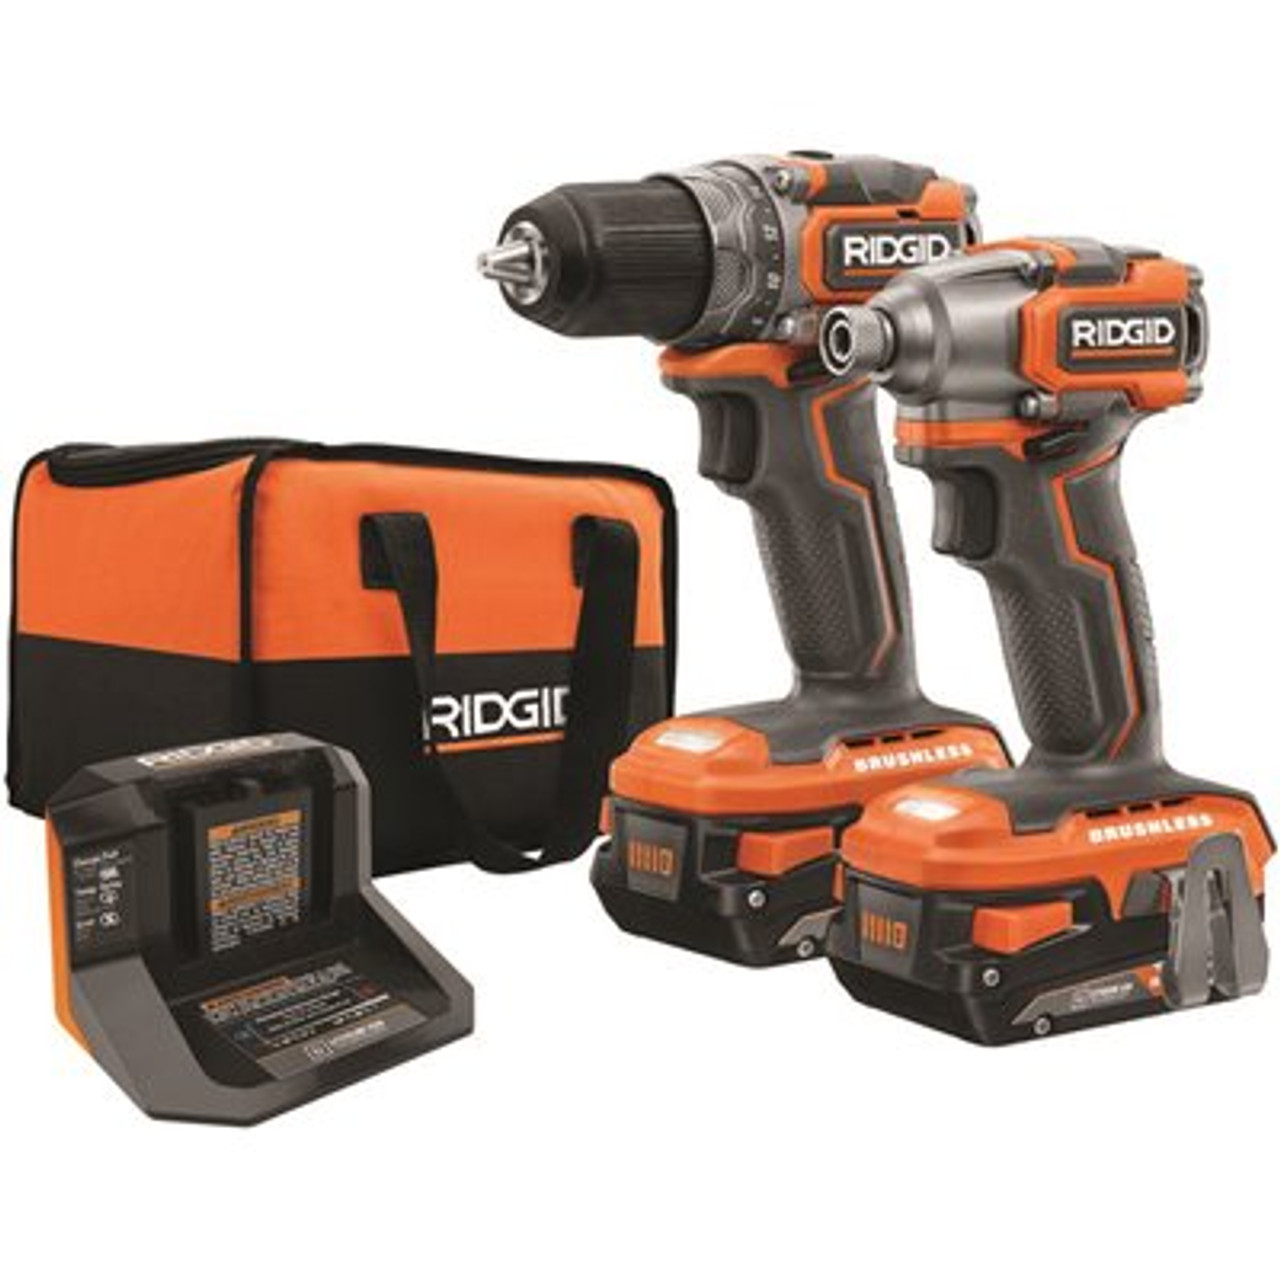 Ridgid 18V Brushless Subcompact Drill Driver And Impact Driver Combo Kit With (2) 2.0 Ah Batteries, Charger And Bag